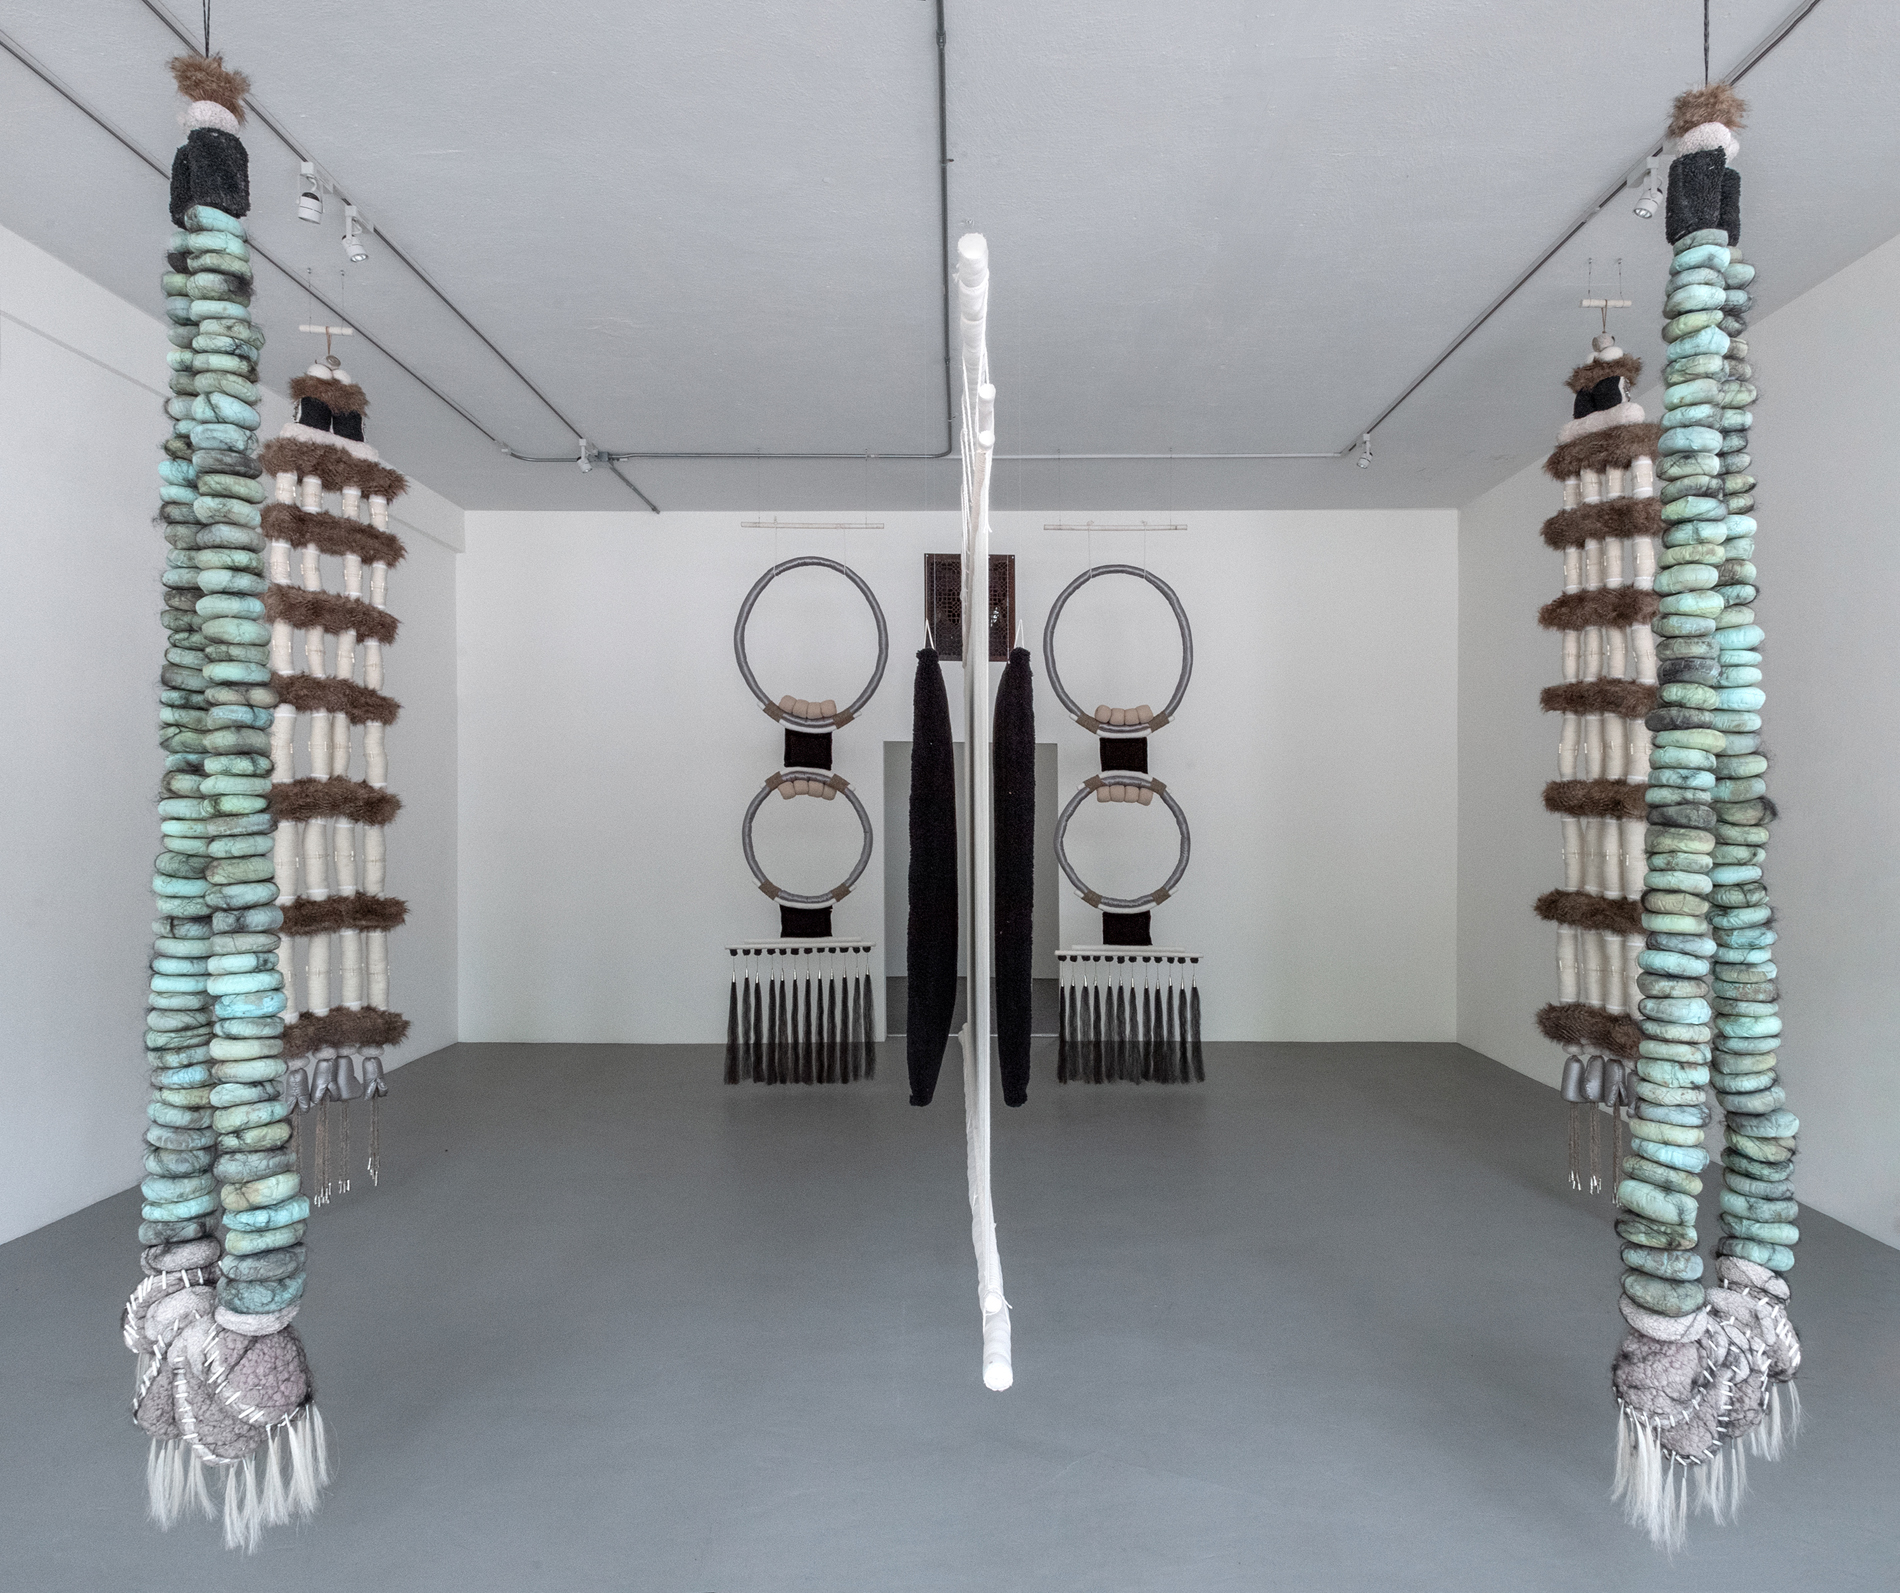 Installation view of jewelry-like fiber sculptures hanging in a gallery with white walls and gray floors.